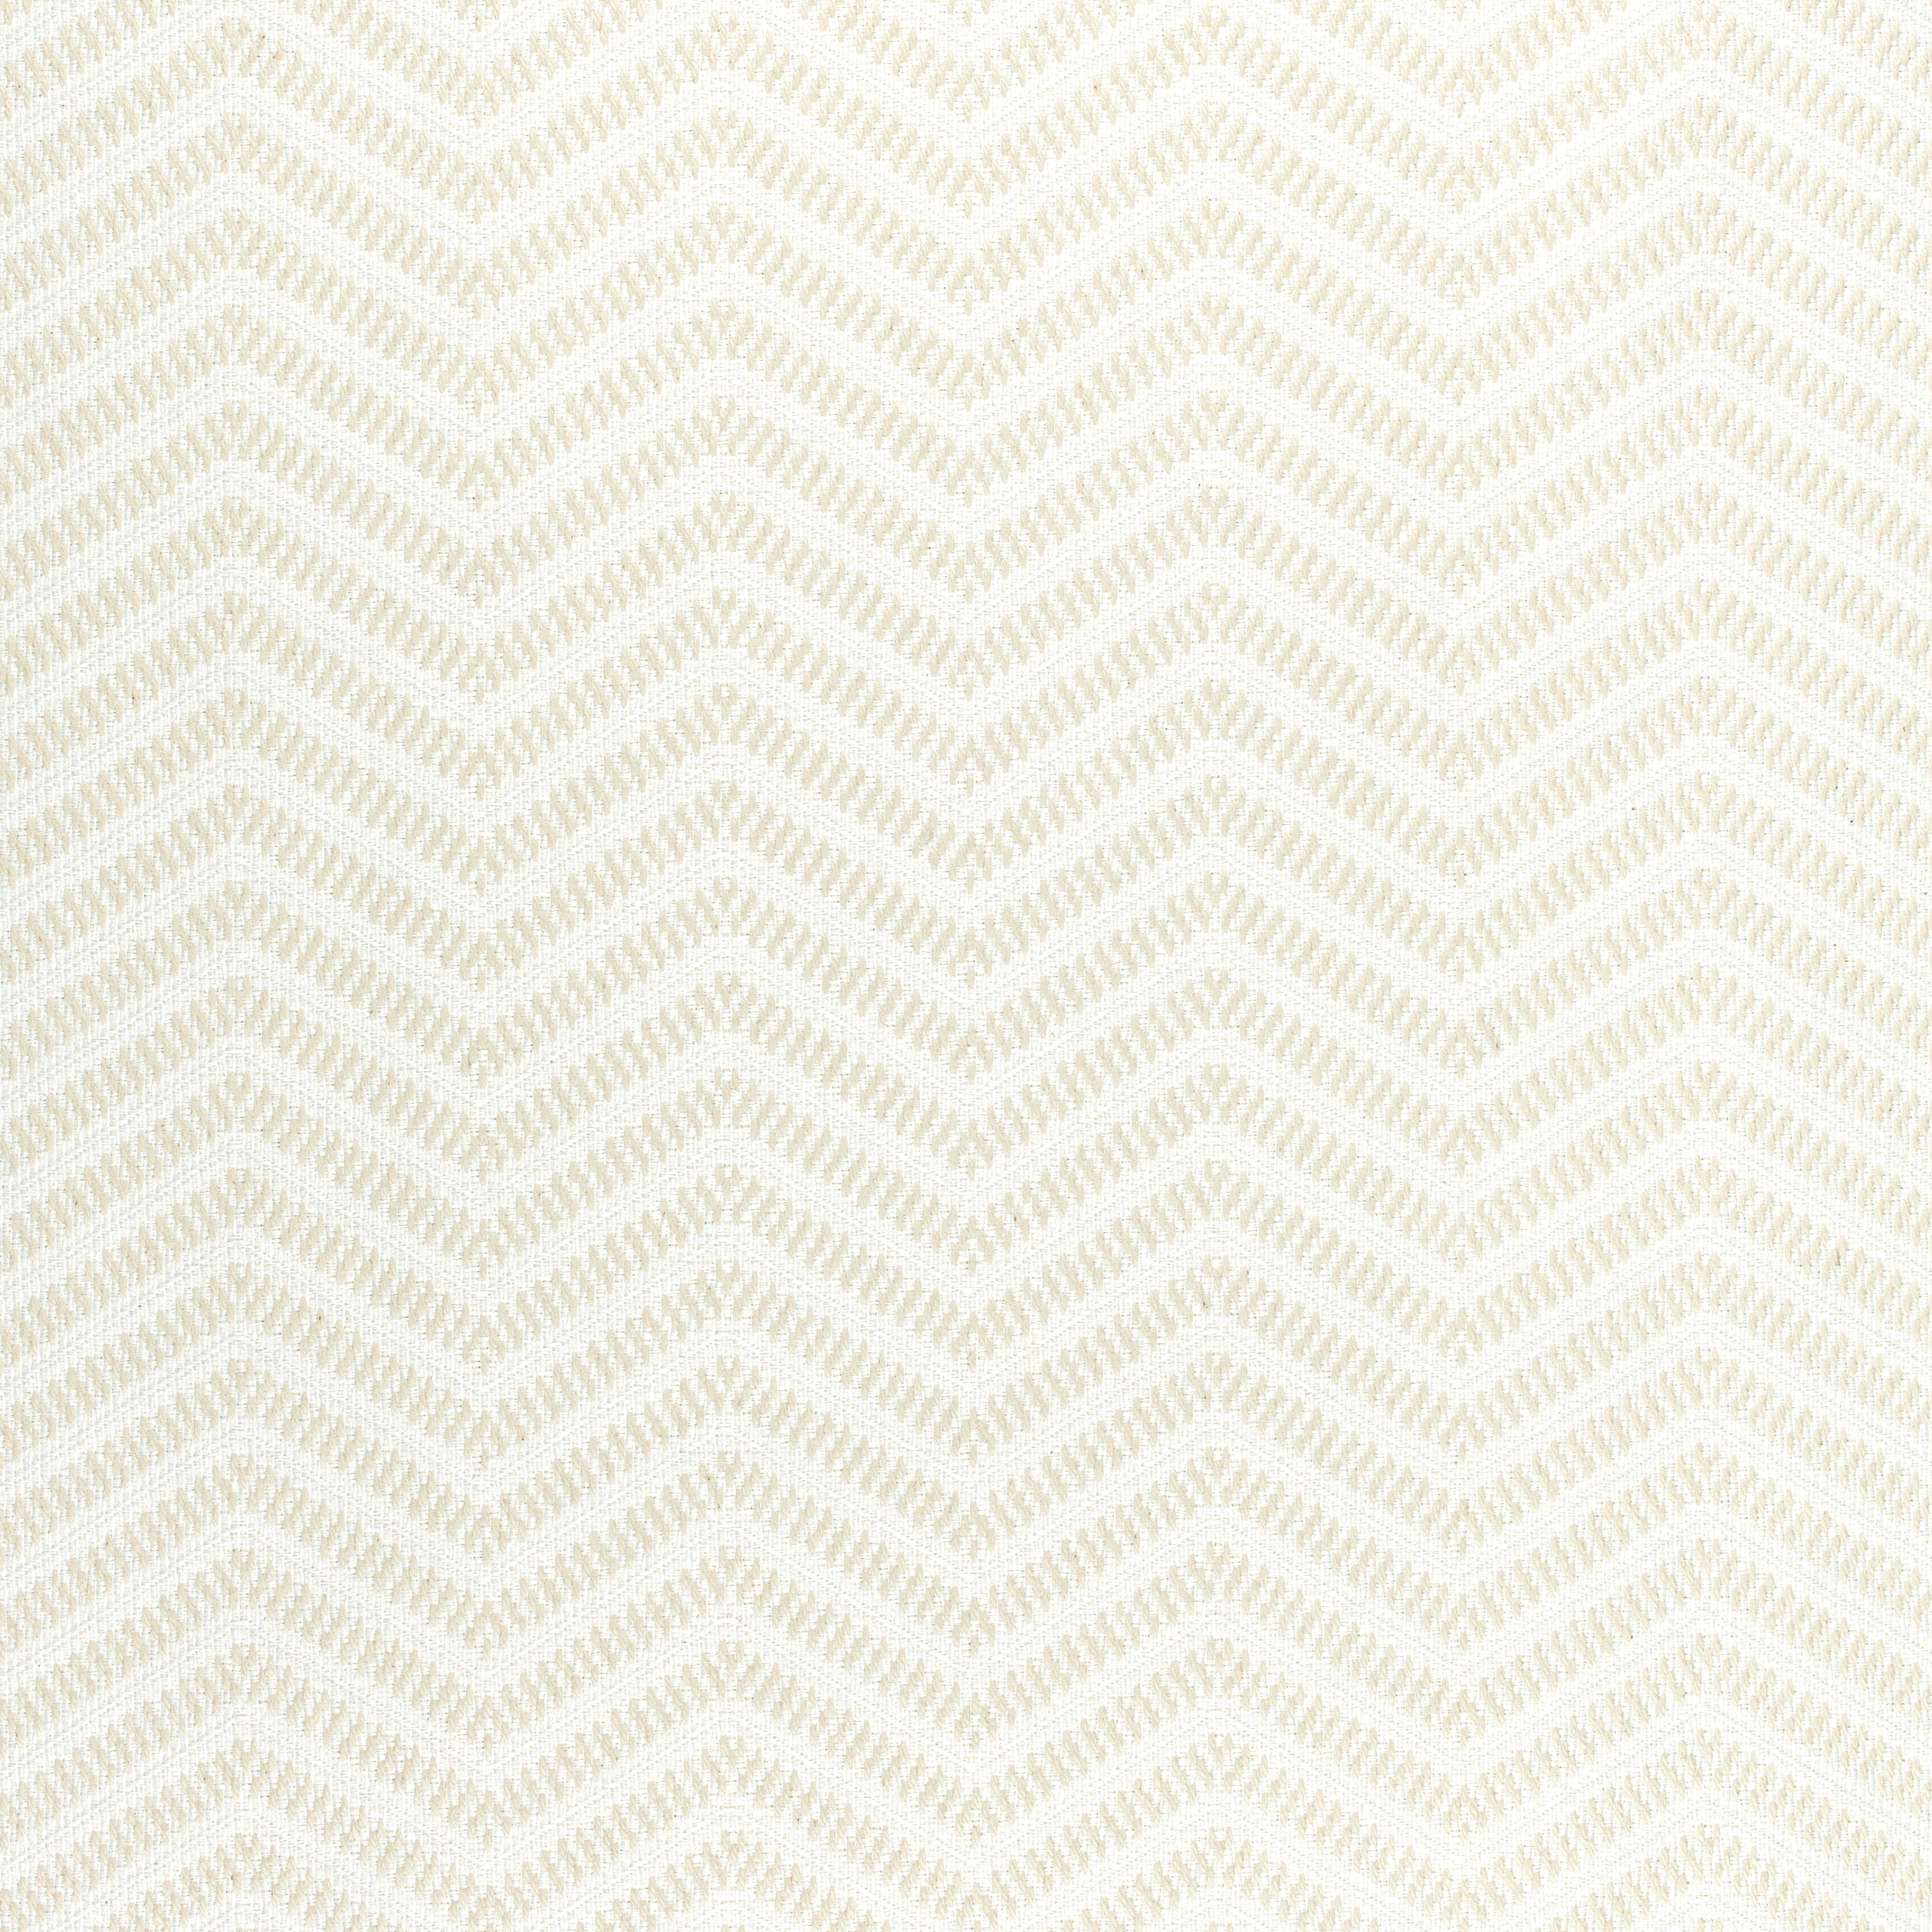 Matari Chevron fabric in almond color - pattern number W80631 - by Thibaut in the Pinnacle collection